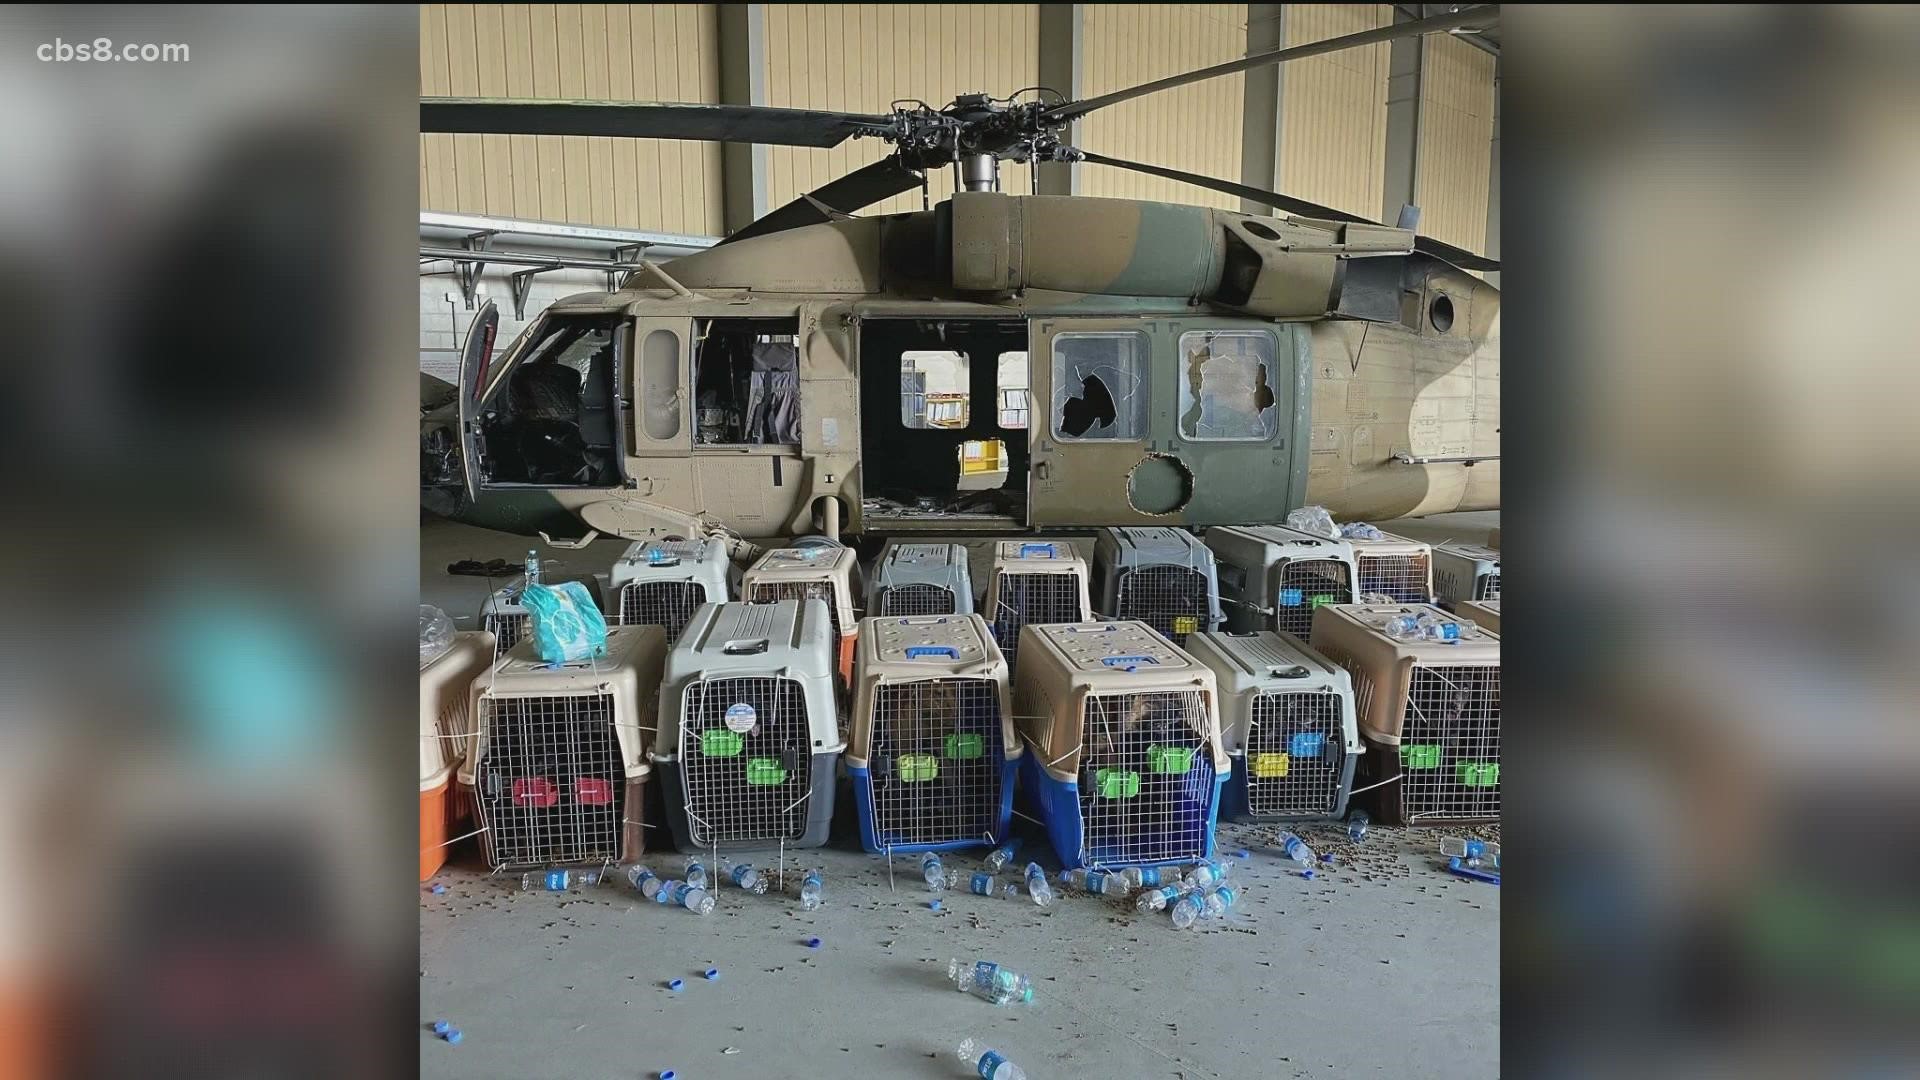 Viral posts claim the U.S. government left military service dogs in cages at the Kabul airport but multiple government agencies confirm those reports are false.